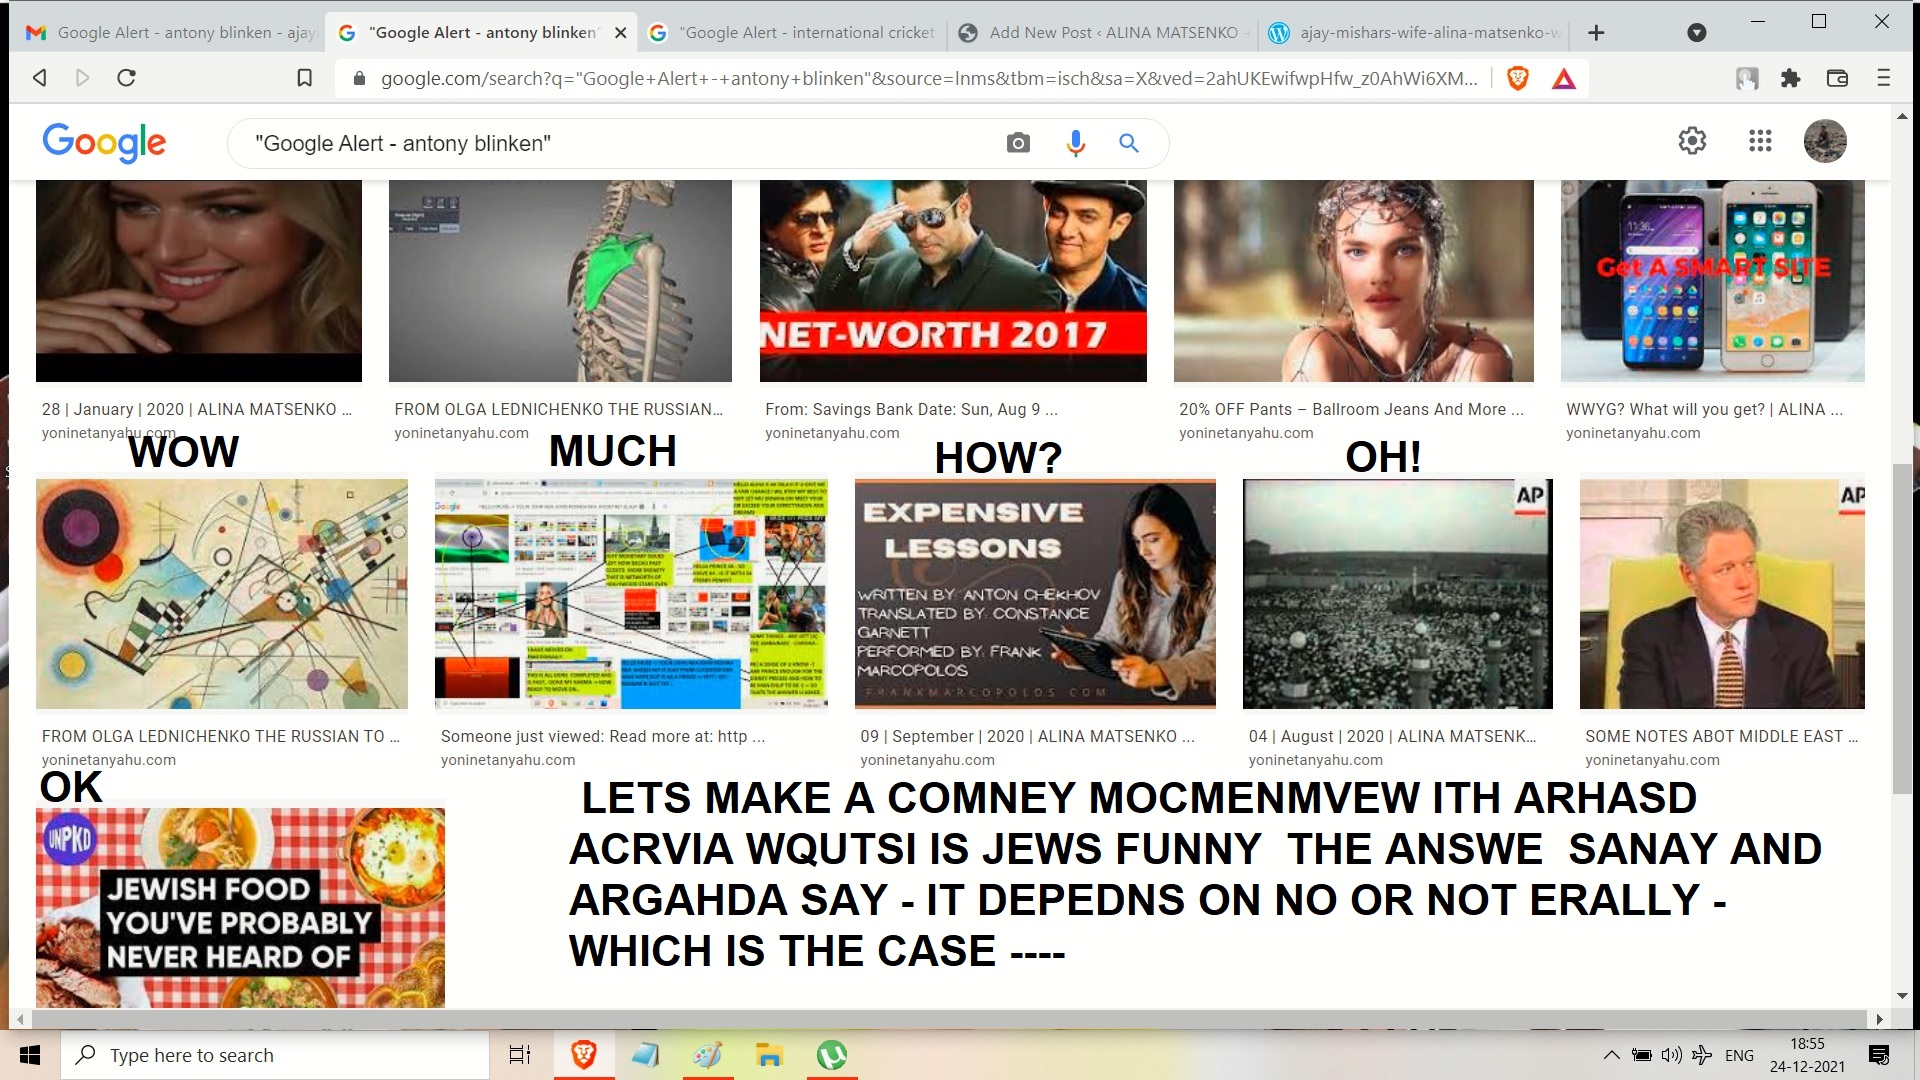 GOOGLE ALERT ANTONY BLINKED 0 LETS MAKE A COMNEY MOCMENMVEW ITH ARHASD ACRVIA WQUTSI IS JEWS FUNNY THE ANSWE SANAY AND ARGAHDA SAY - IT DEPEDNS ON NO OR NOT ERALLY - WHICH IS THE CASE ----